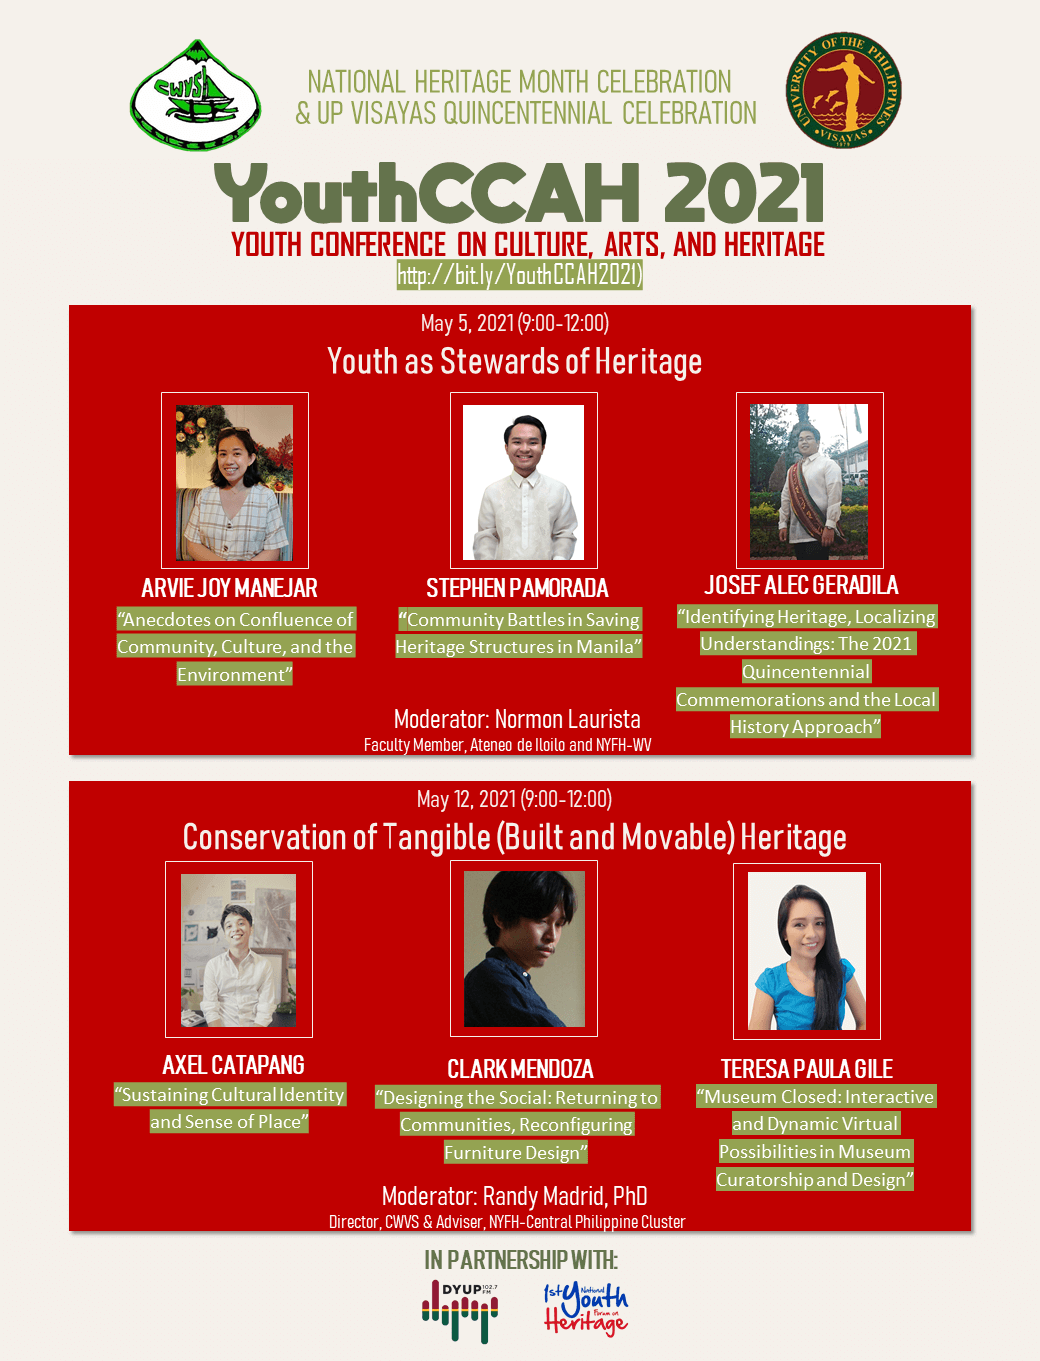 CWVS holds YouthCCAH 2021